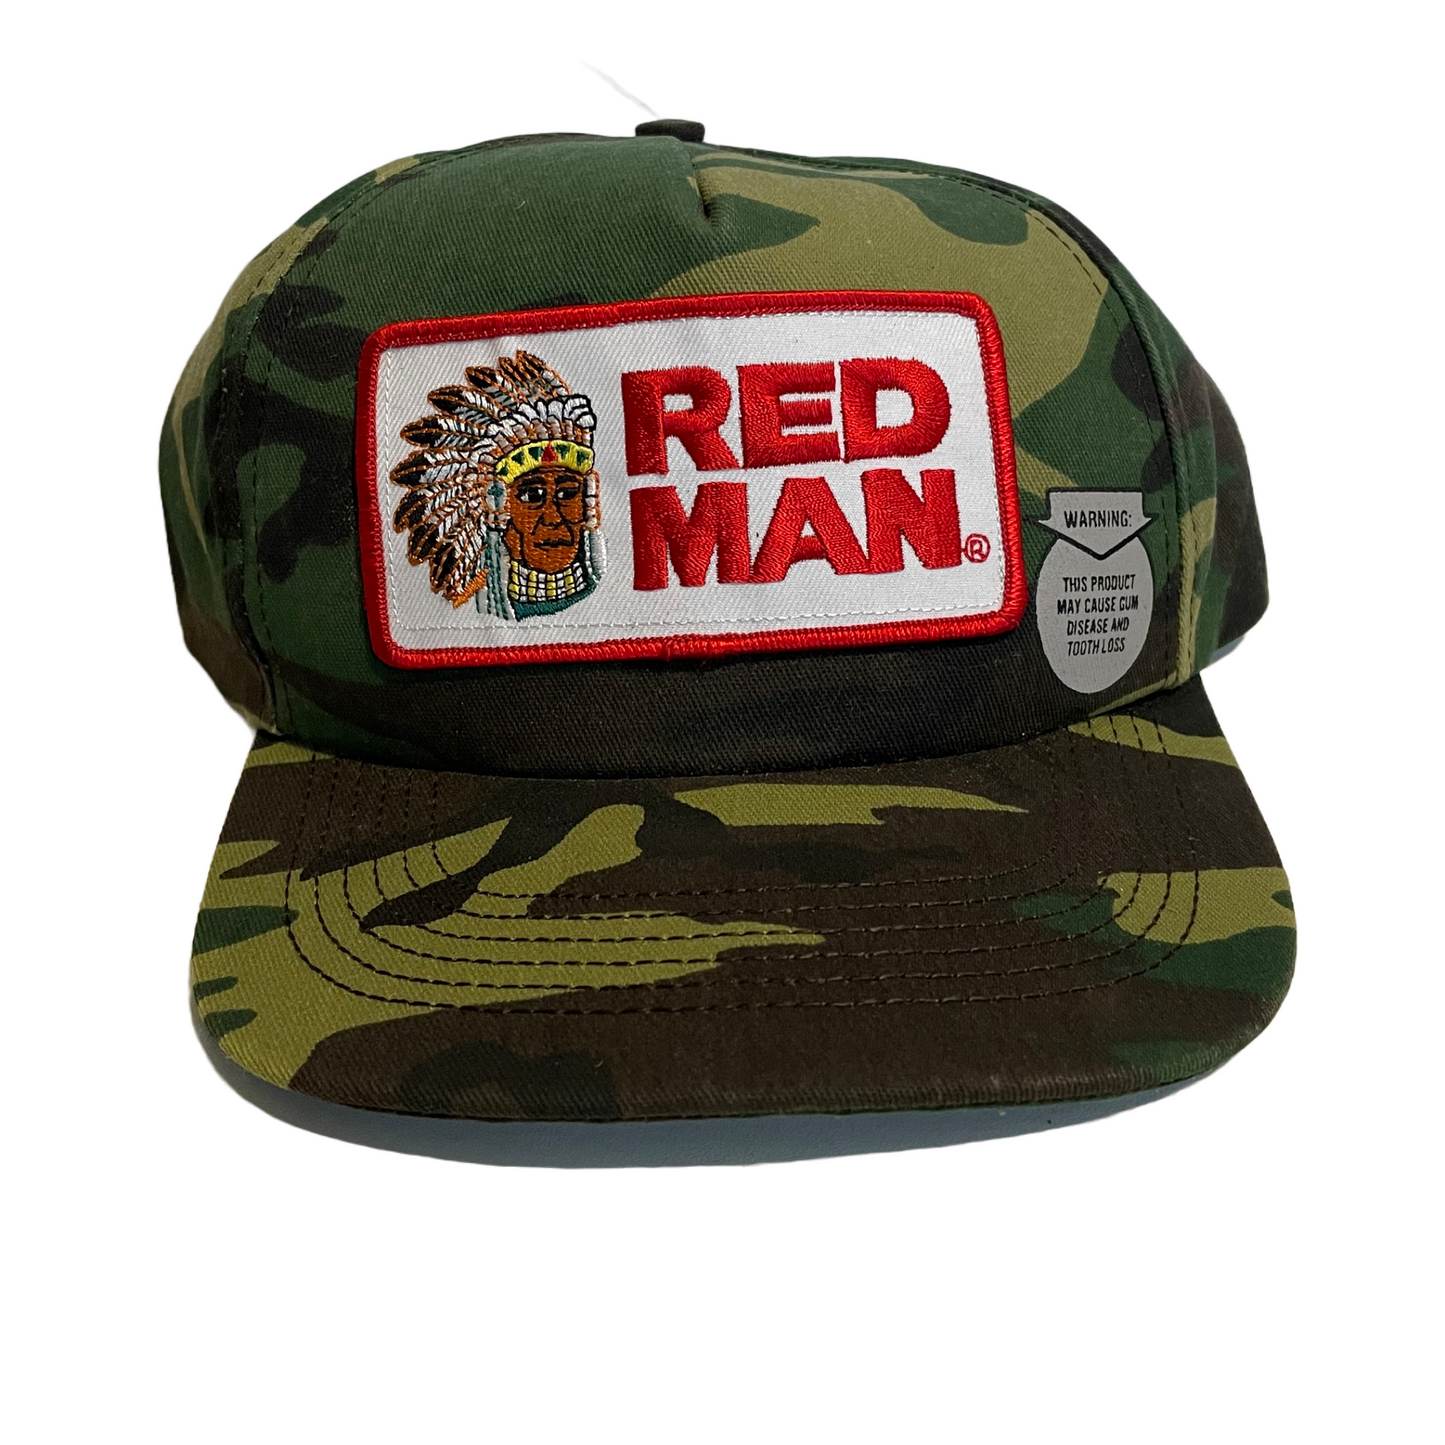 Vintage Red Man Chewing Tobacco Snapback Camo Hat 80s Made in USA